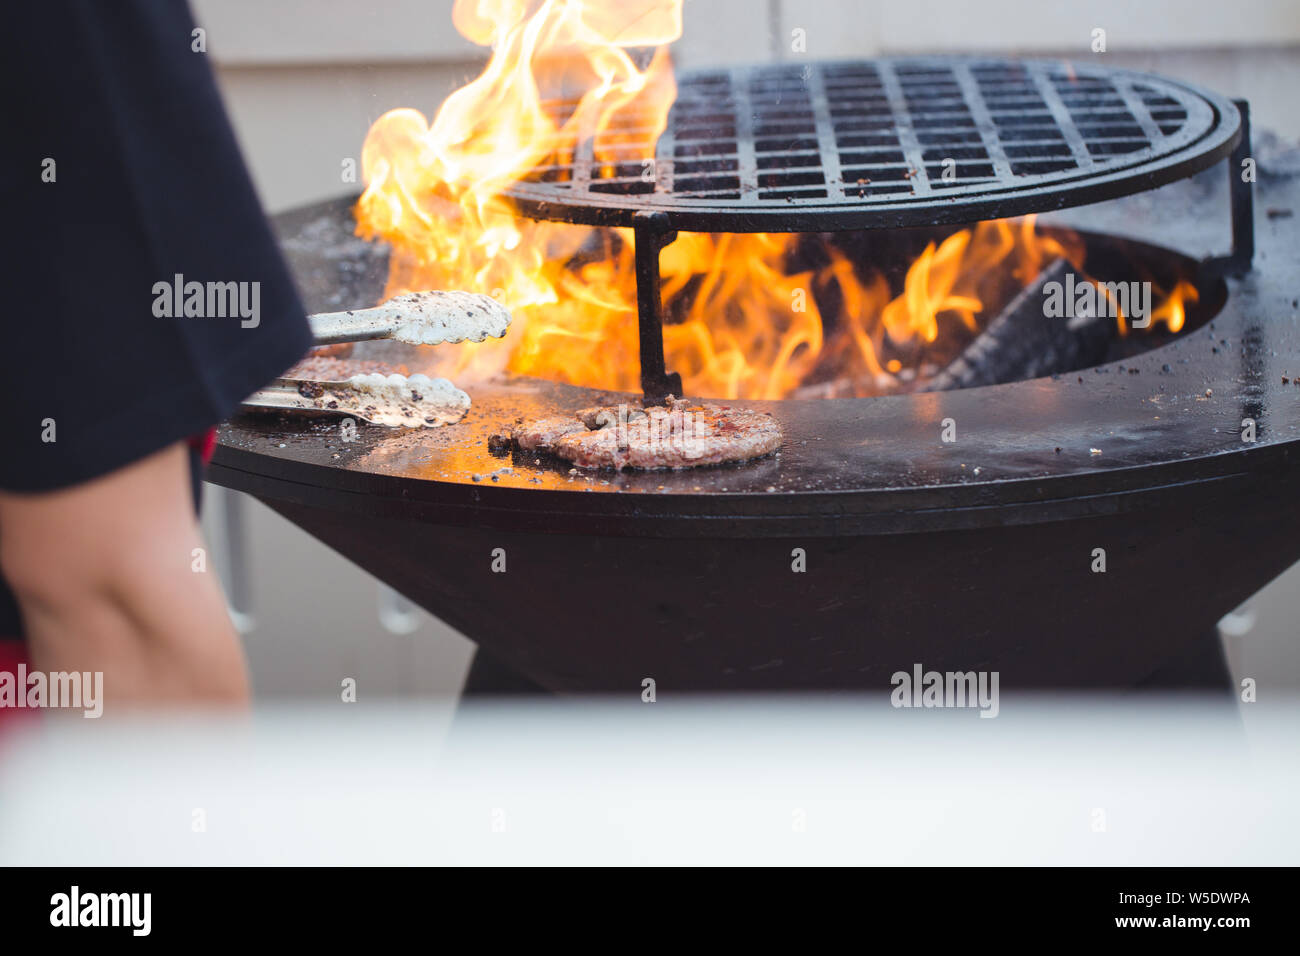 Preparing juicy burger cutlets on grill Stock Photo